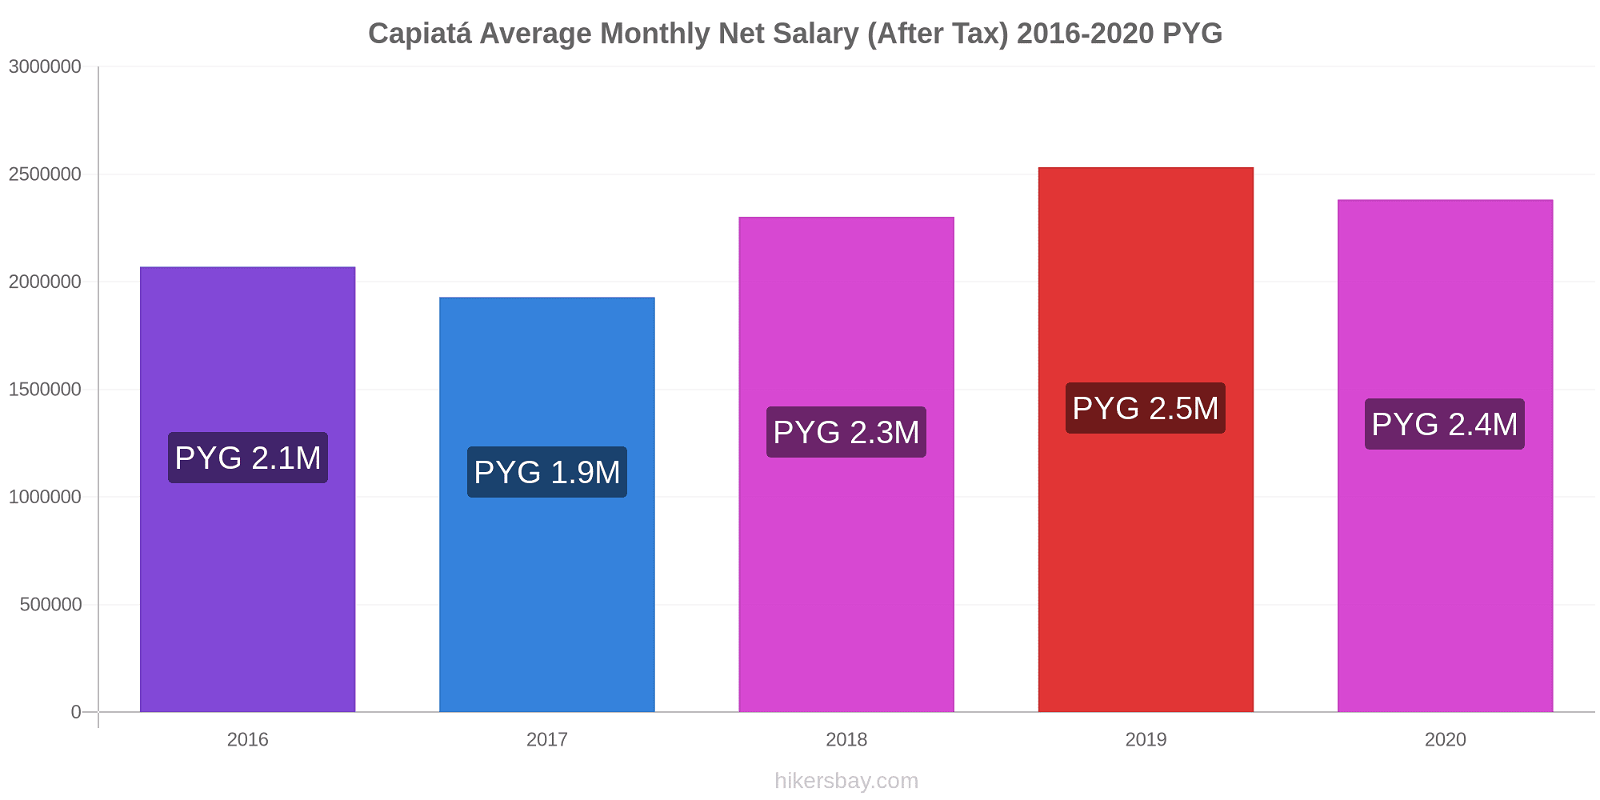 Capiatá price changes Average Monthly Net Salary (After Tax) hikersbay.com